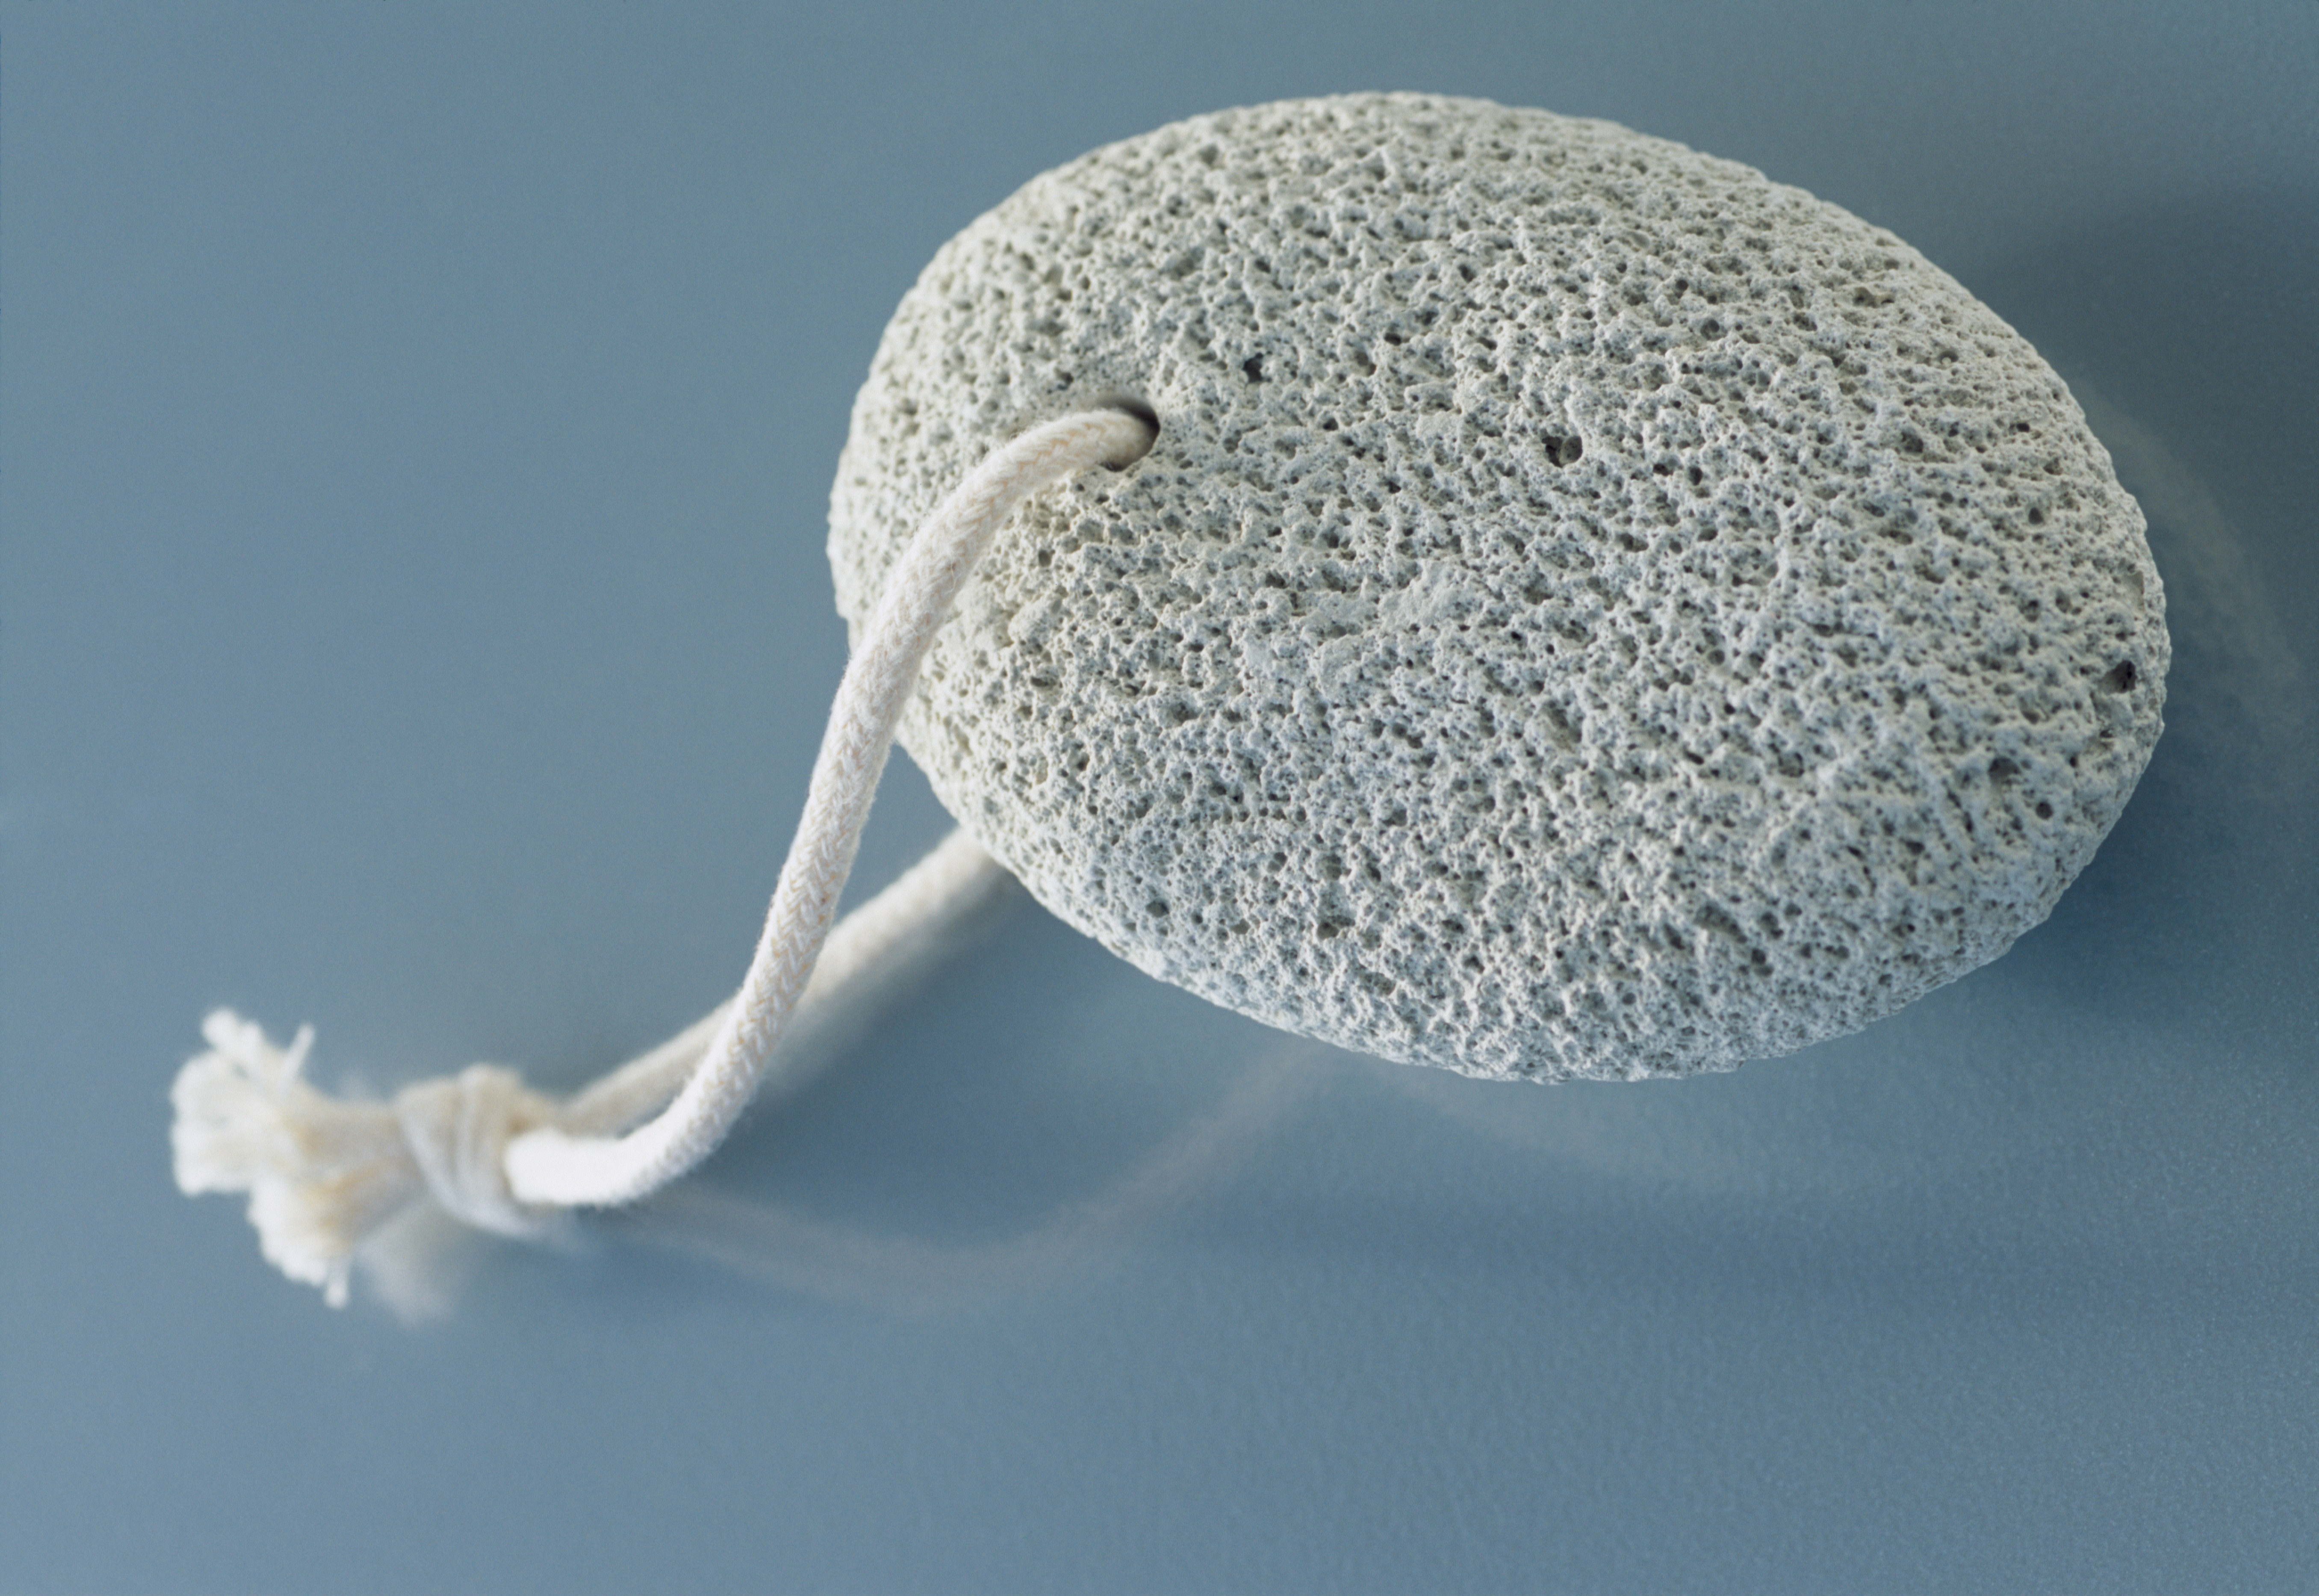 Pumice stone | Source: Getty Images